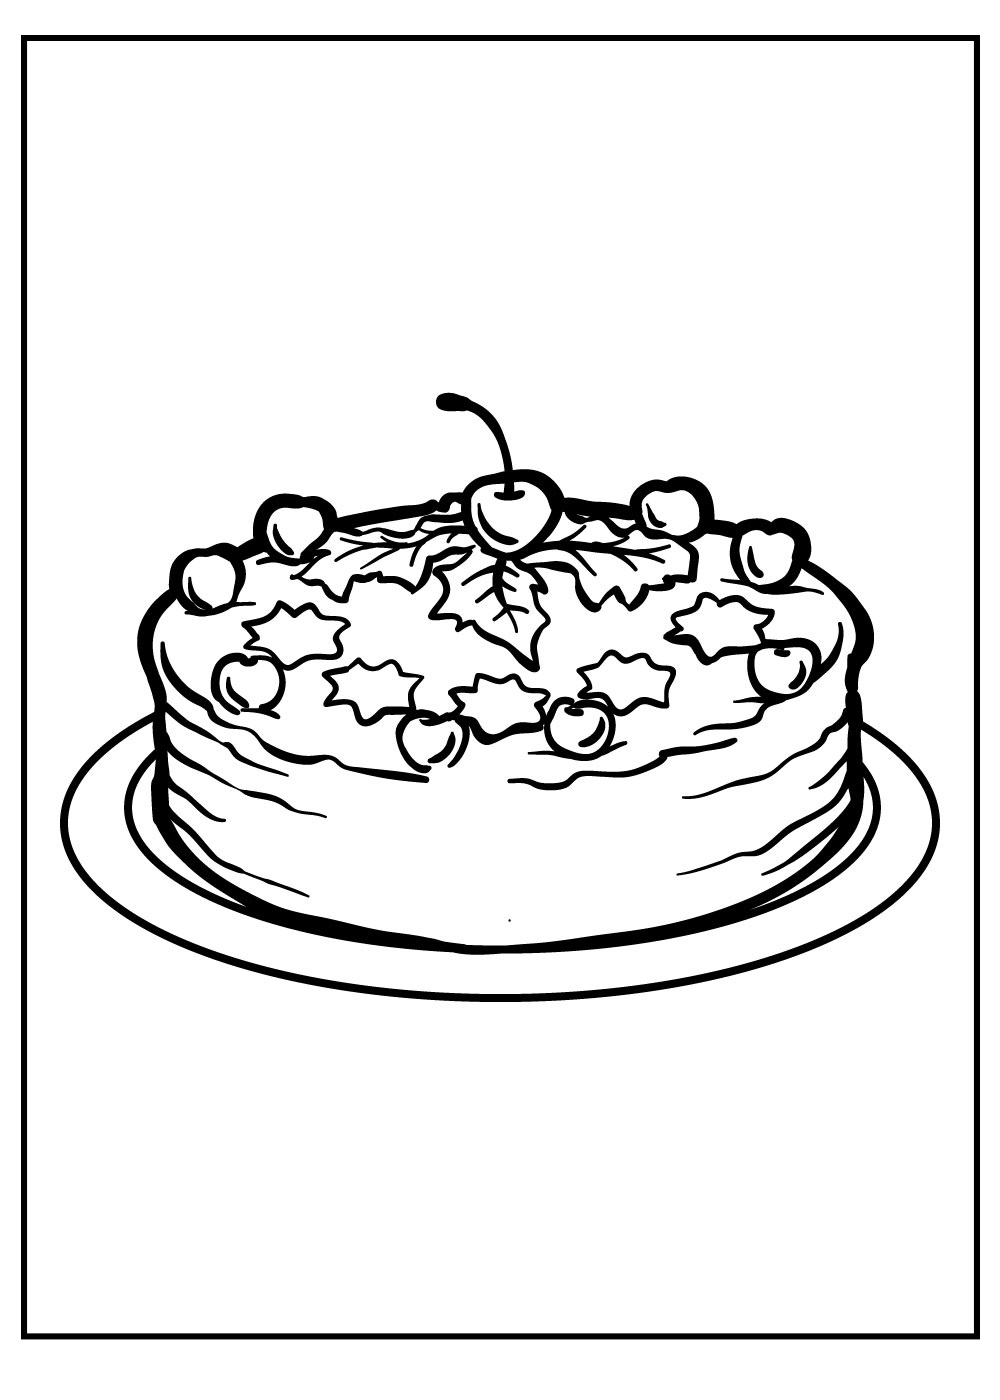 Birthday Cake On Plate Coloring Page